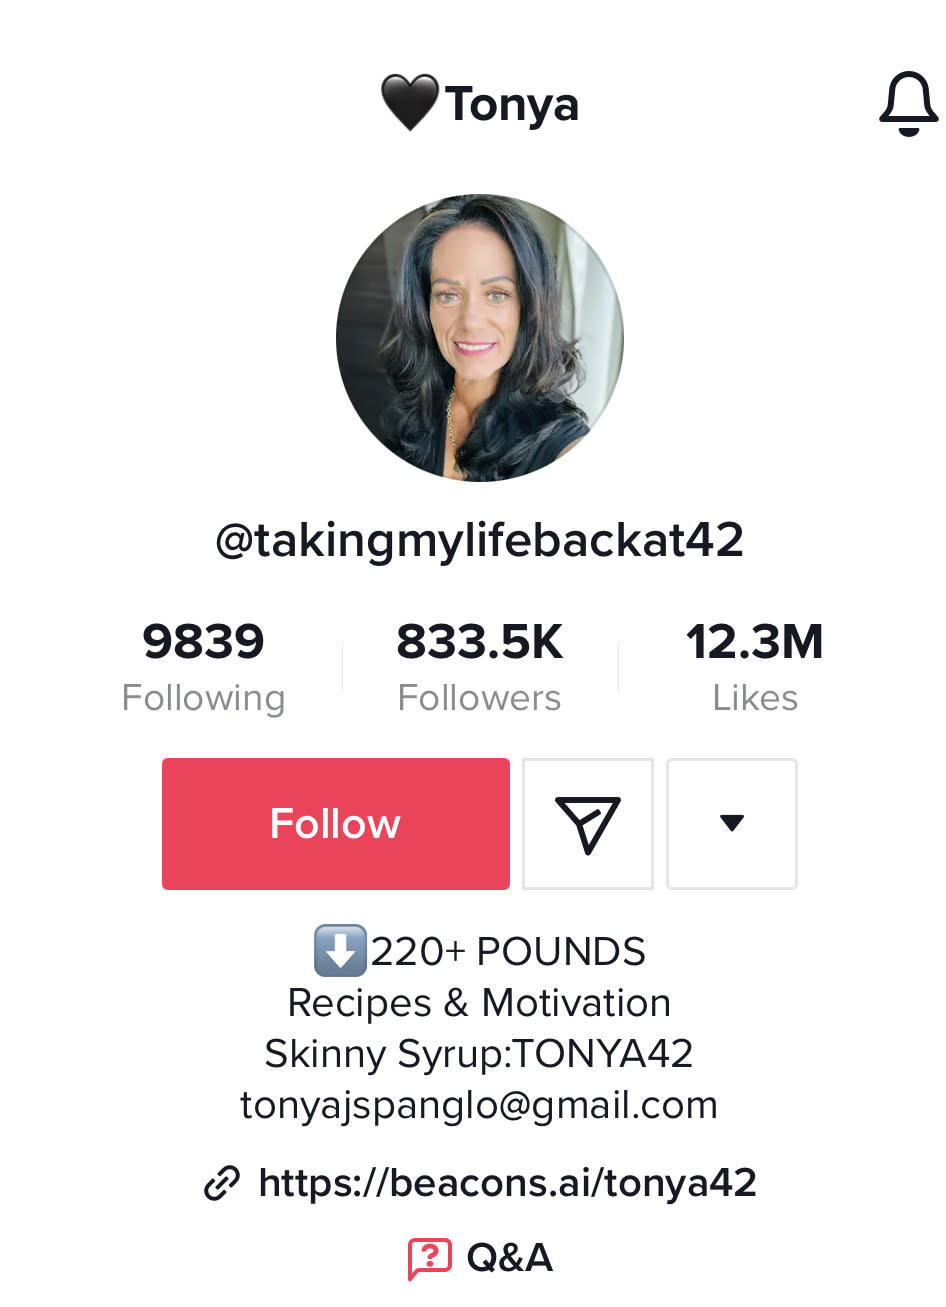 Tonya's TikTok profile: down 220+ pounds, recipes and motivation, and a code for Skinny Syrup